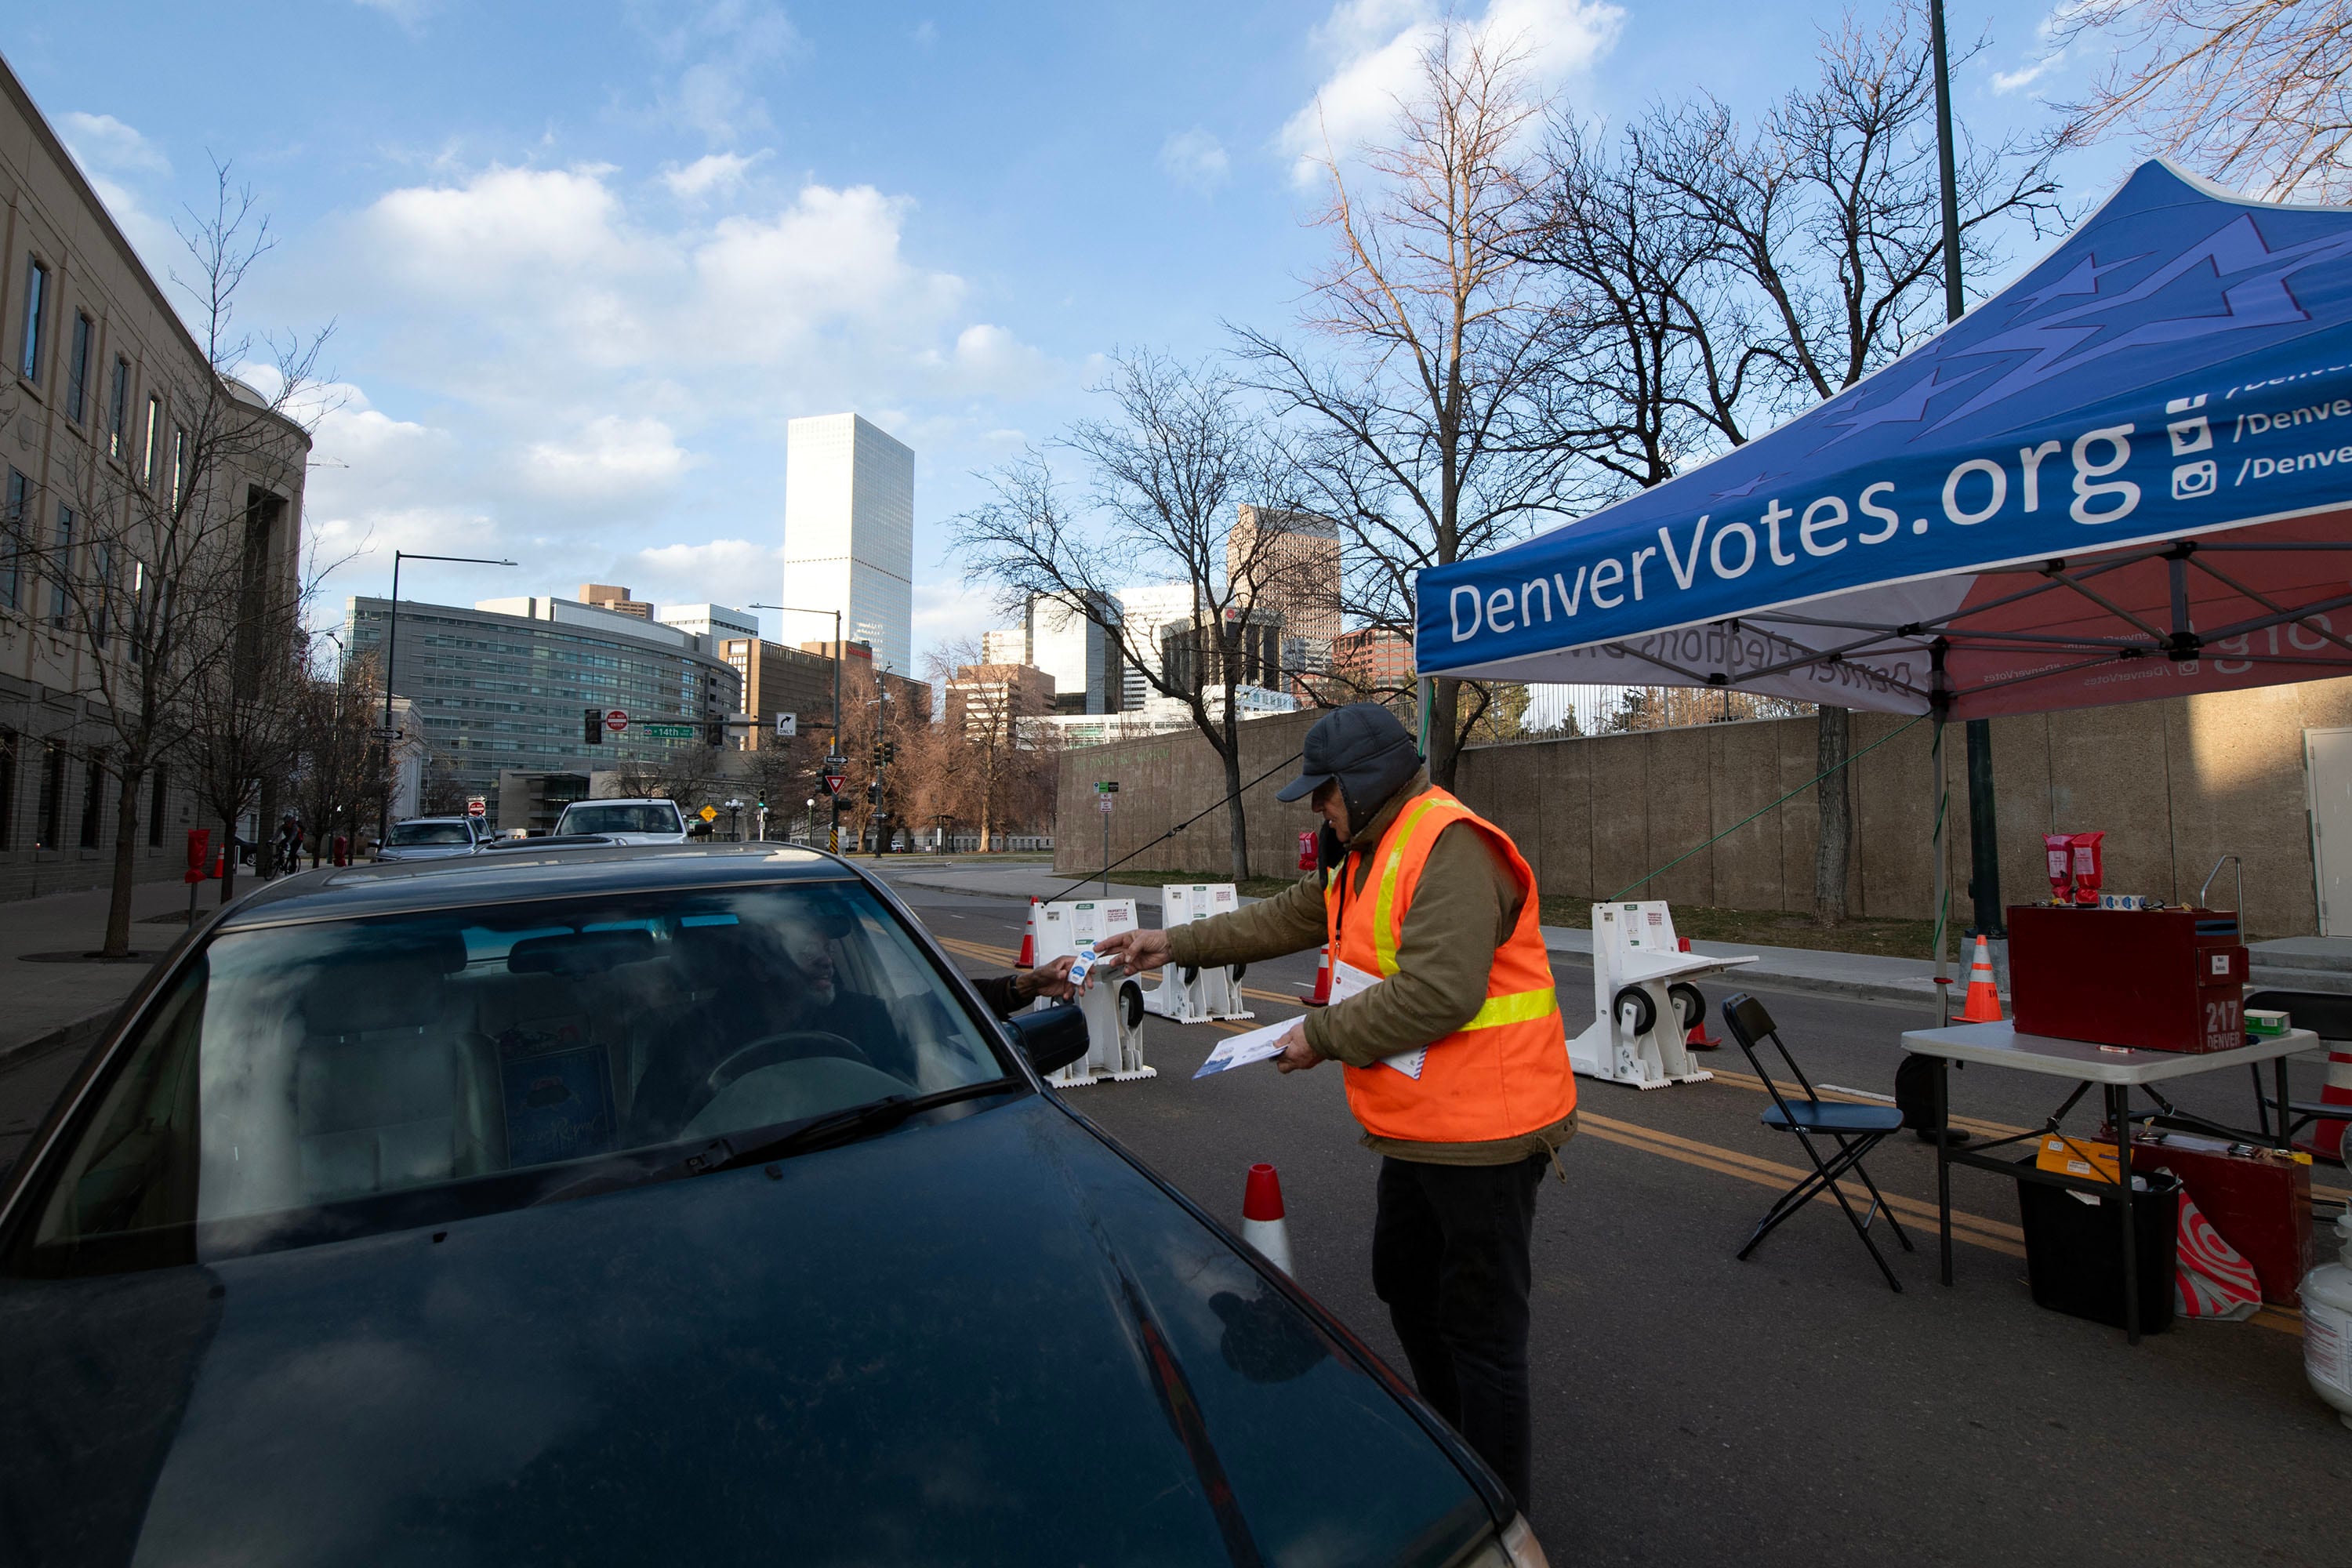 A person wearing a safety vest grabs a mail-in ballot from a person sitting in a car on a street with buildings and a blue and cloudy sky in the background.